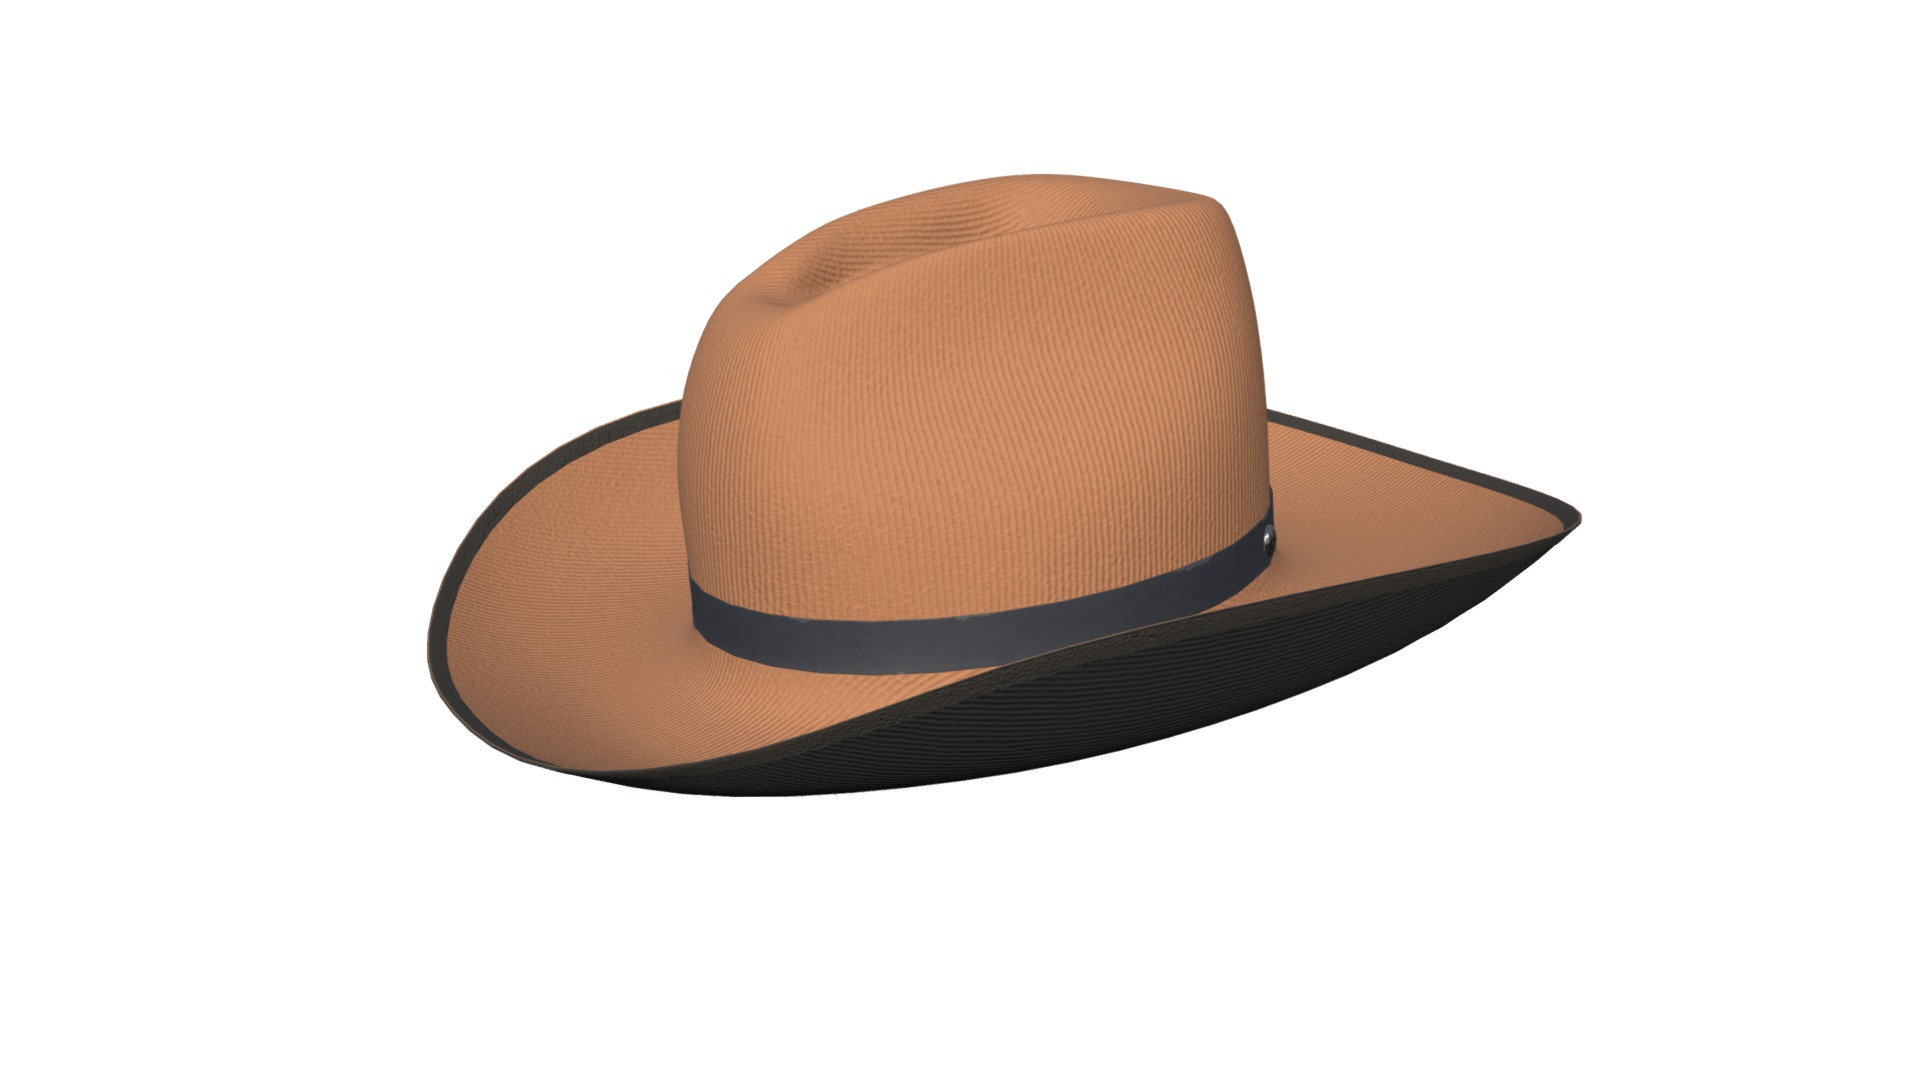 3D model Сowboy hat model - This is a 3D model of the Сowboy hat model. The 3D model is about a brown hat with a black band.